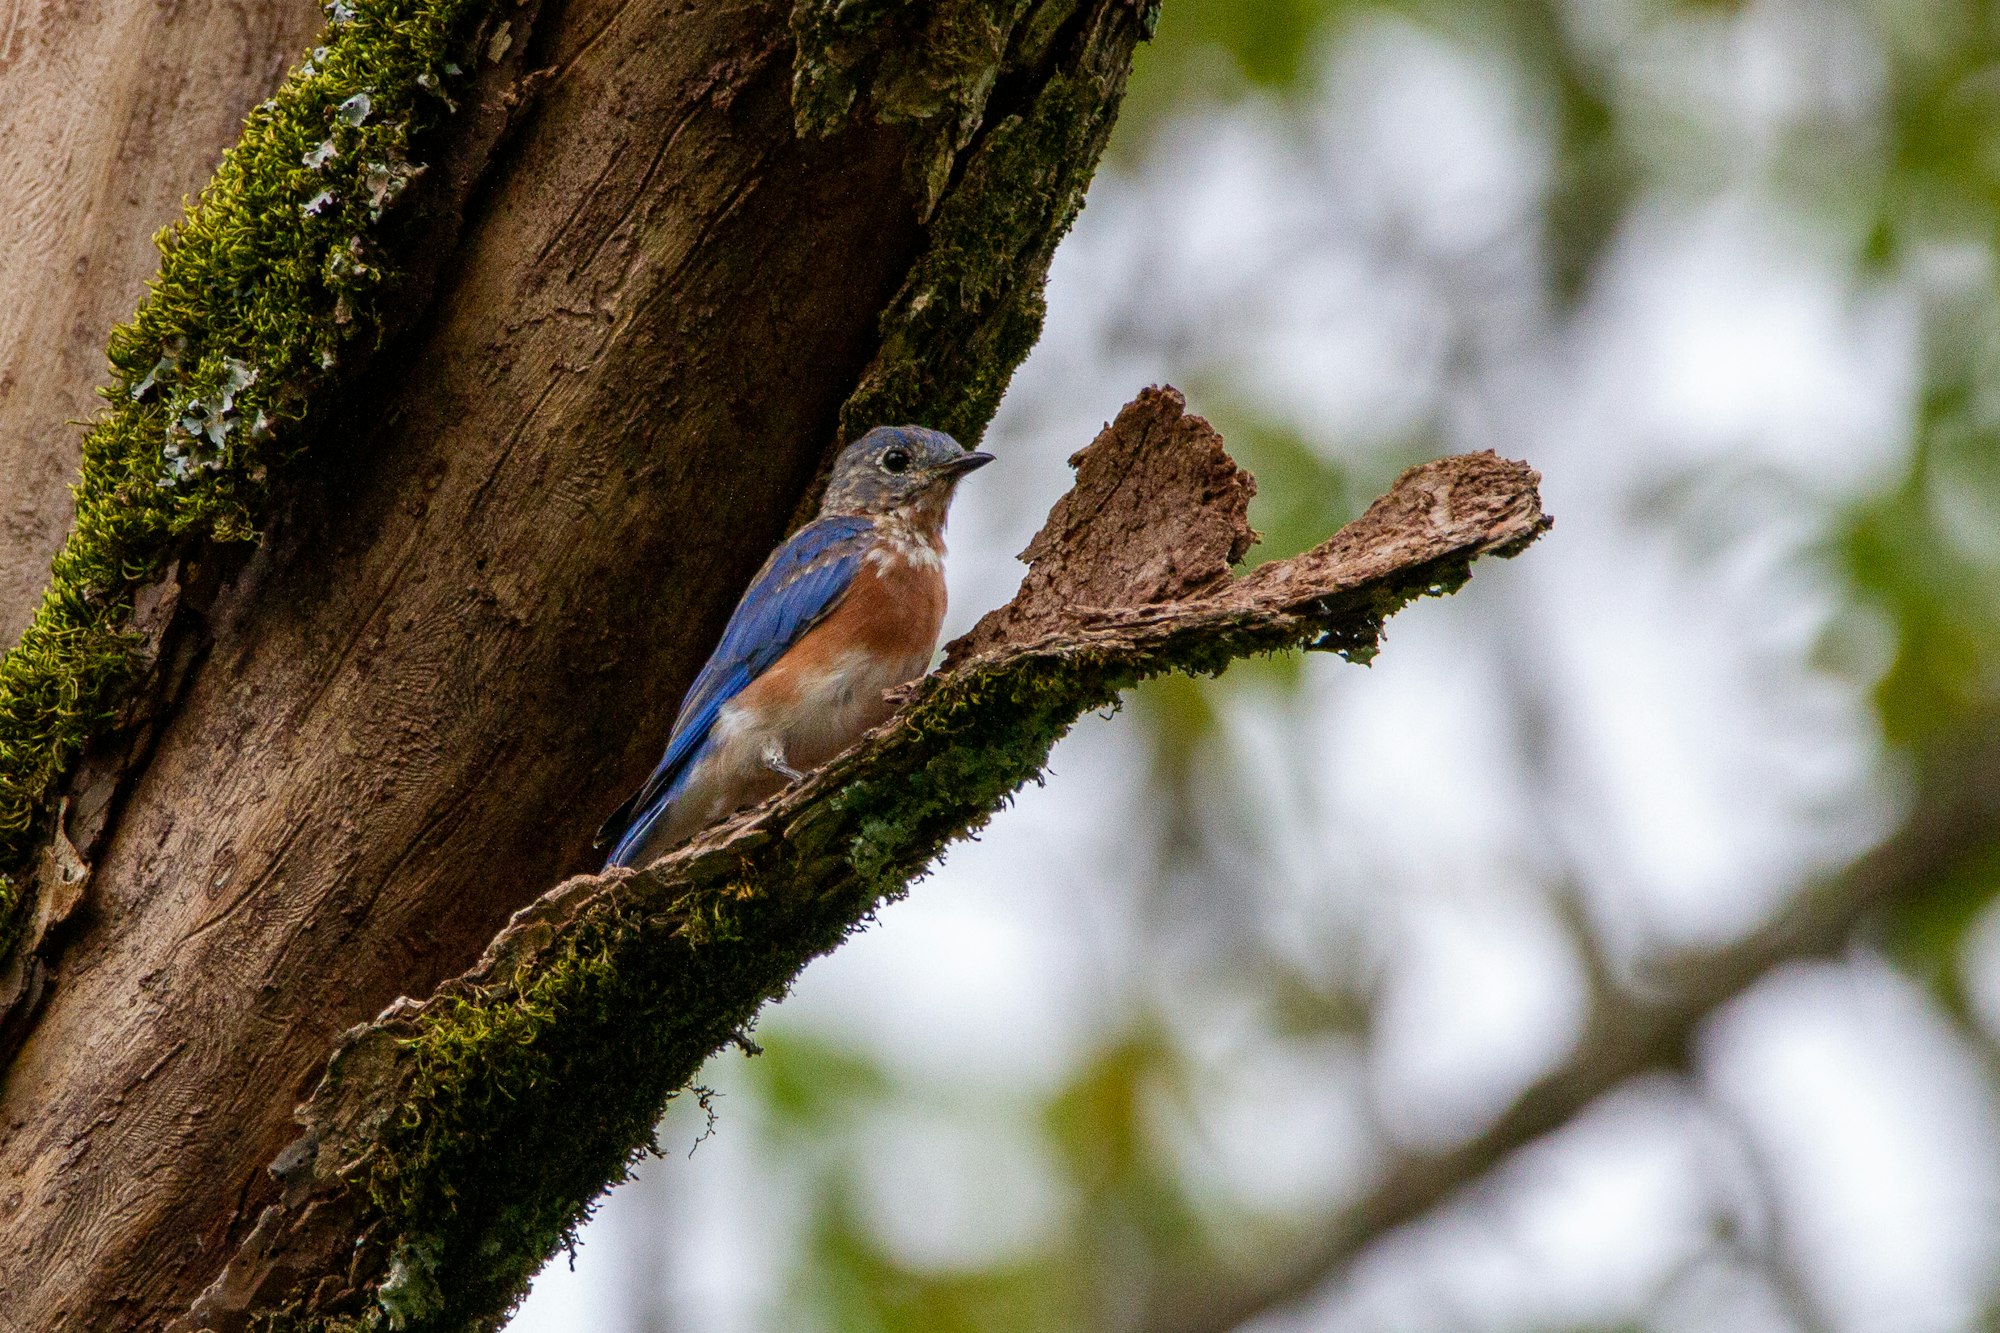 A juvenile eastern bluebird taking refuge in the bark of a tree.